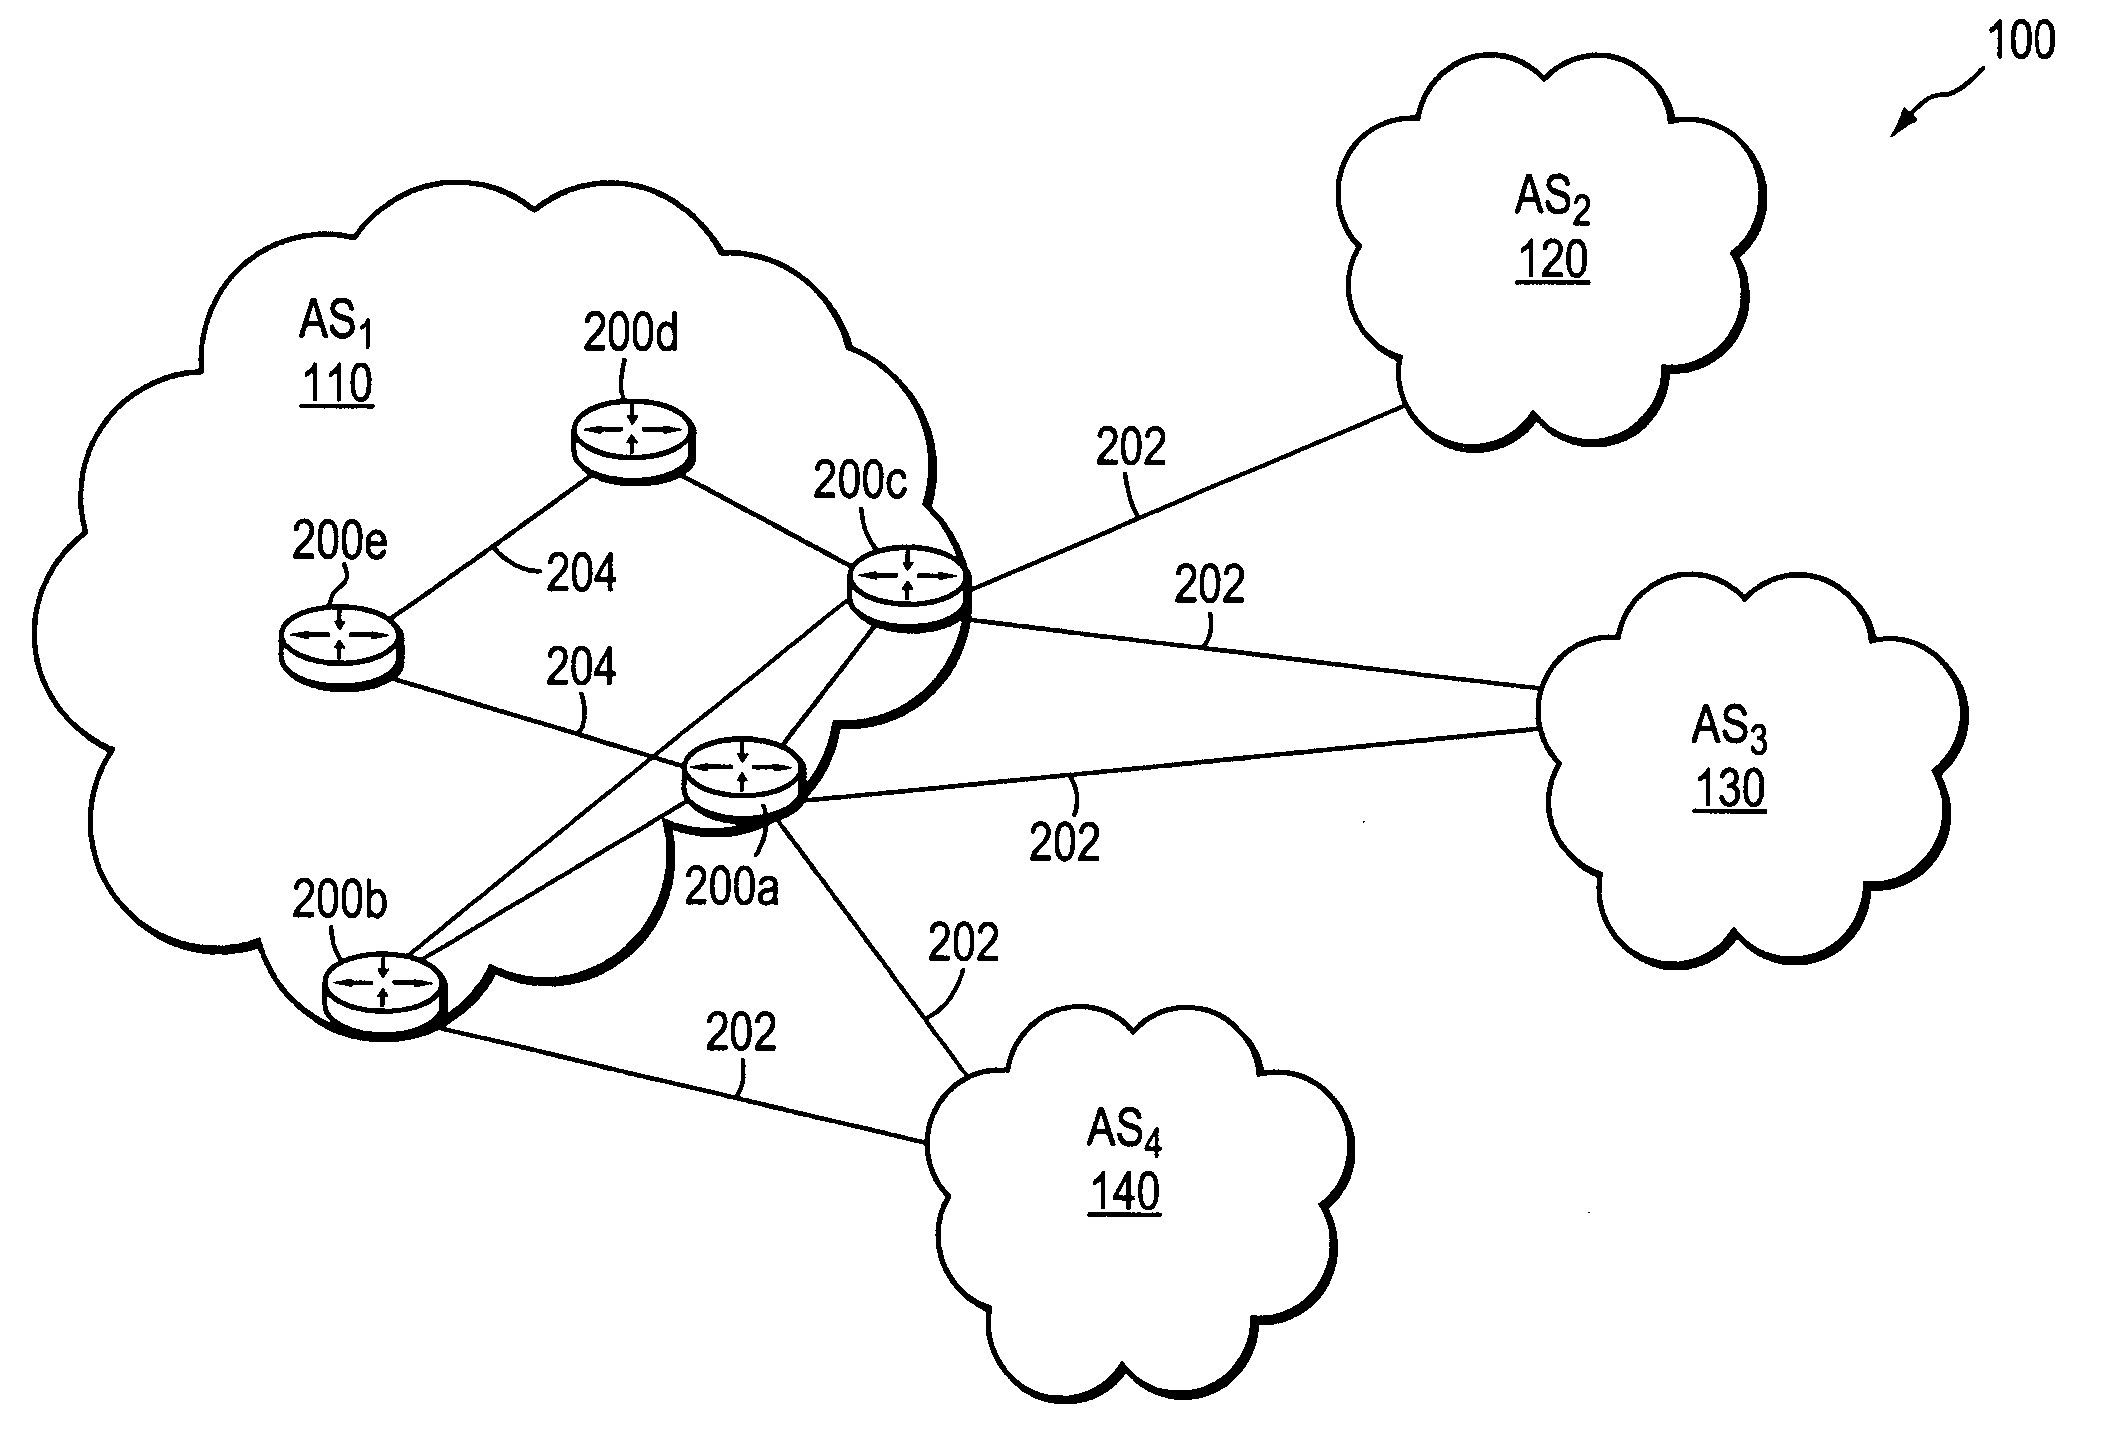 Automatic route tagging of BGP next-hop routes in IGP